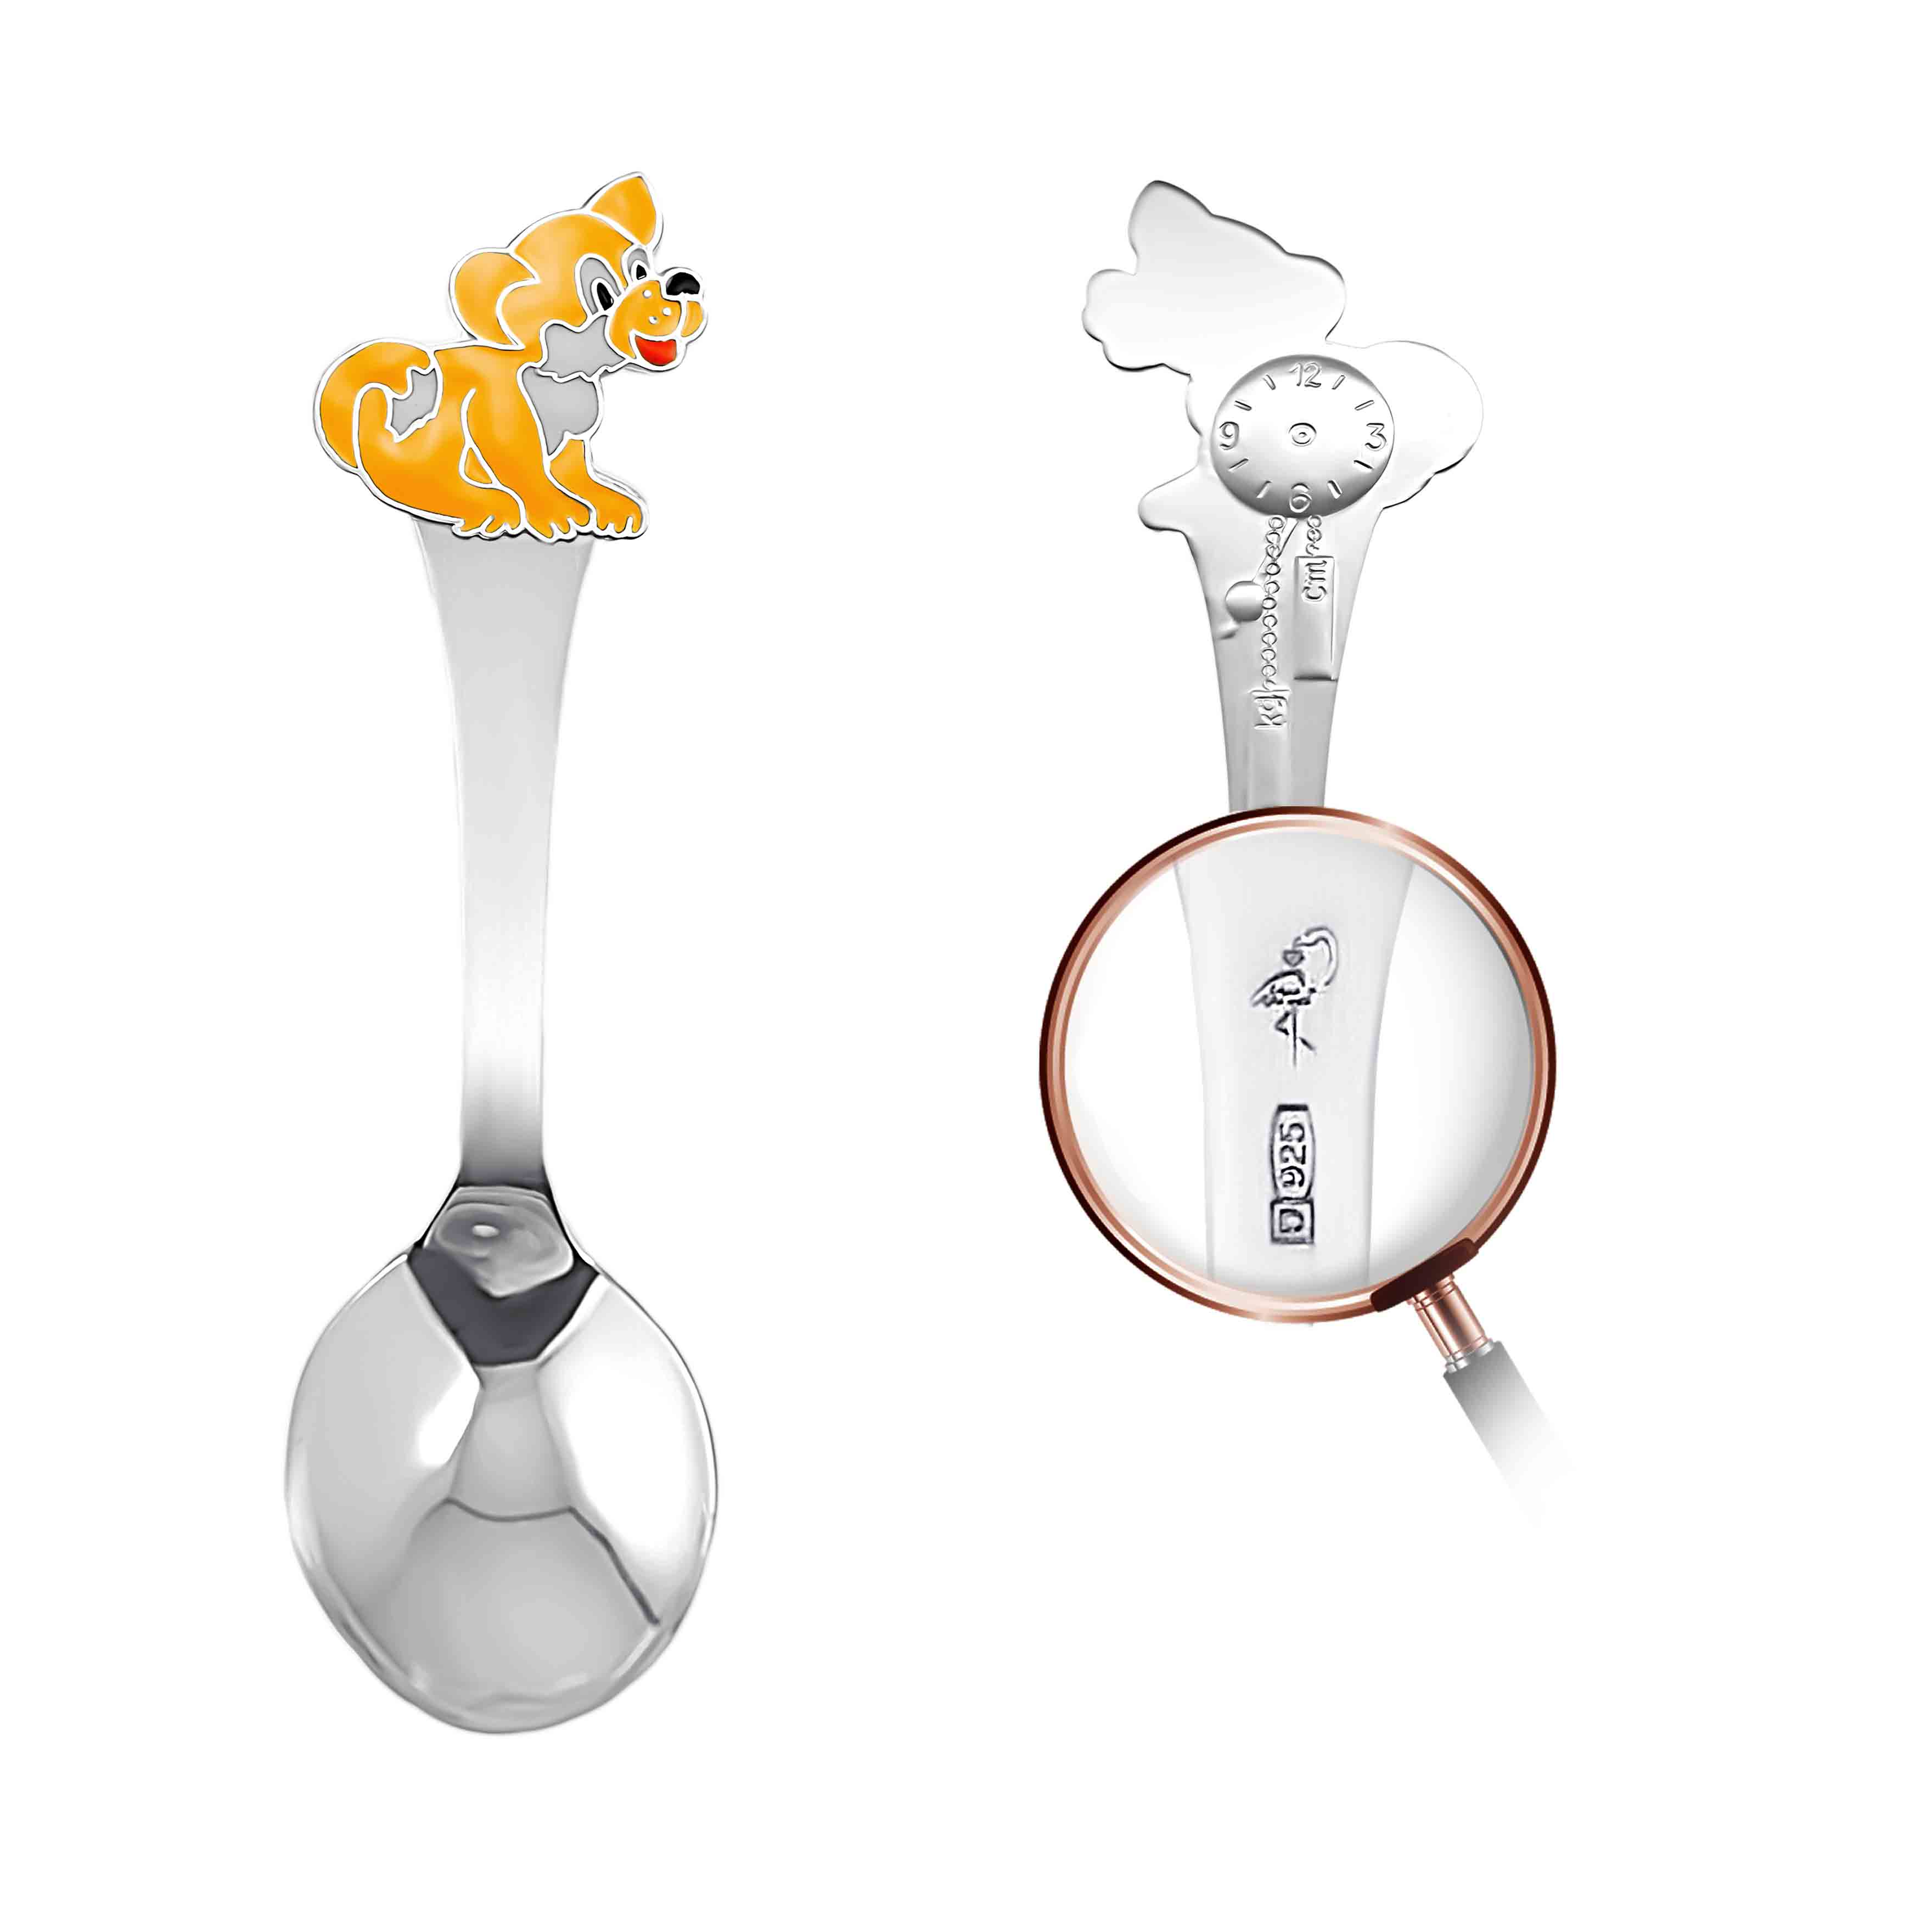 https://www.goldenflamingo.us/media/uploads/product/child-silver-spoon-yellow-pup_12851220-05_b_3520.jpg